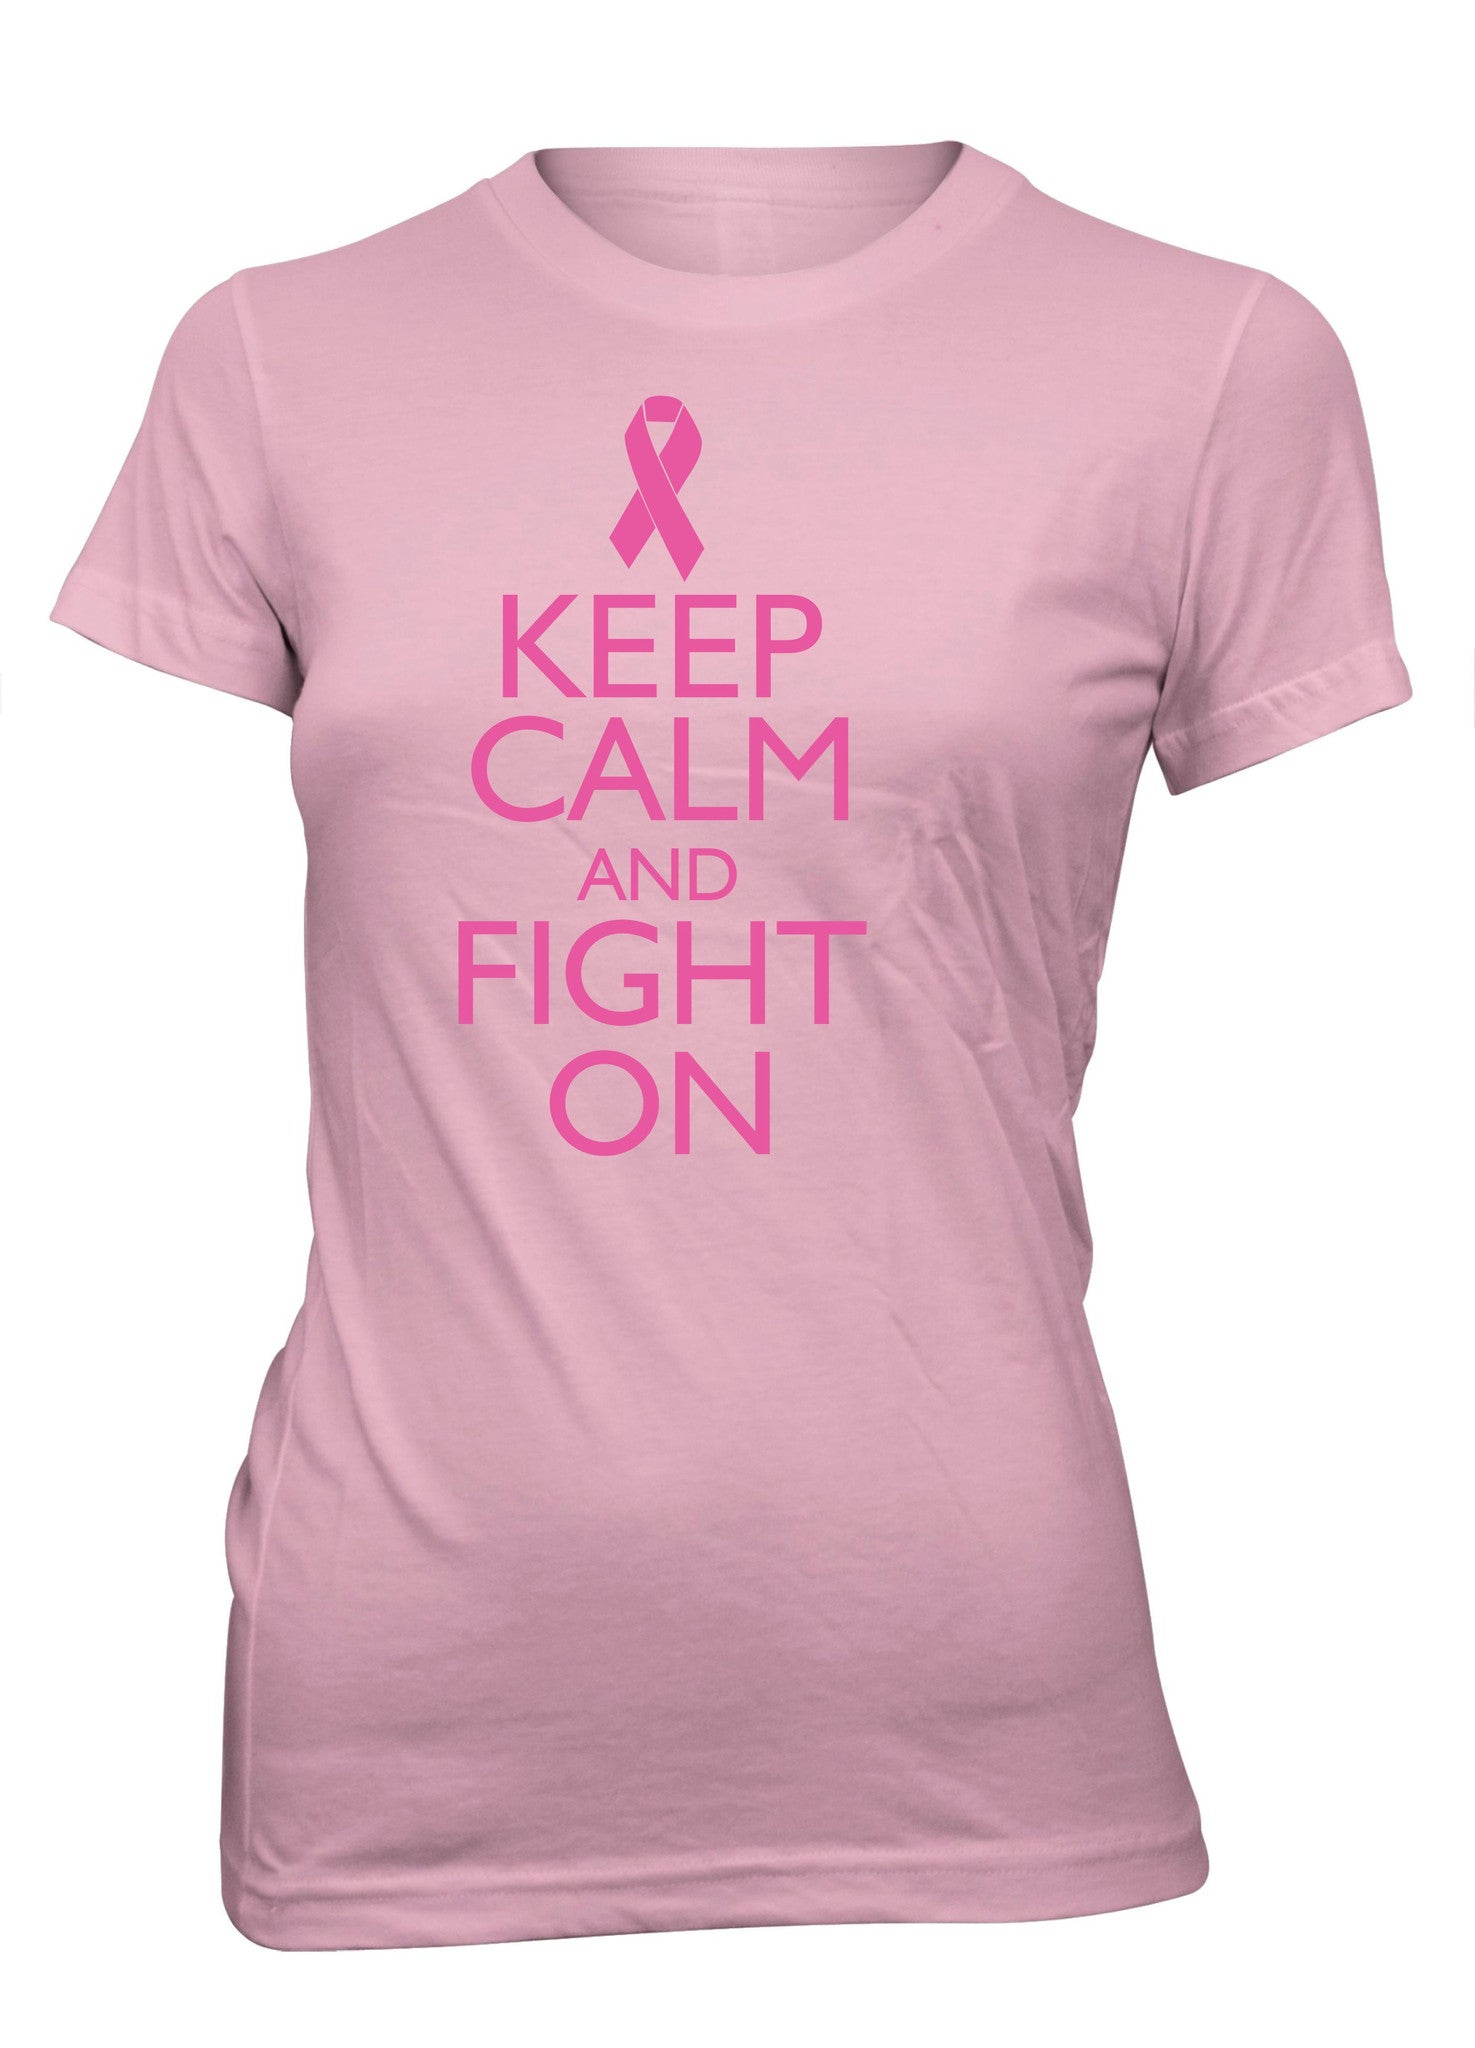 Keep Calm and Fight On Breast Cancer Awareness Pink Ribbon T-Shirt for Juniors